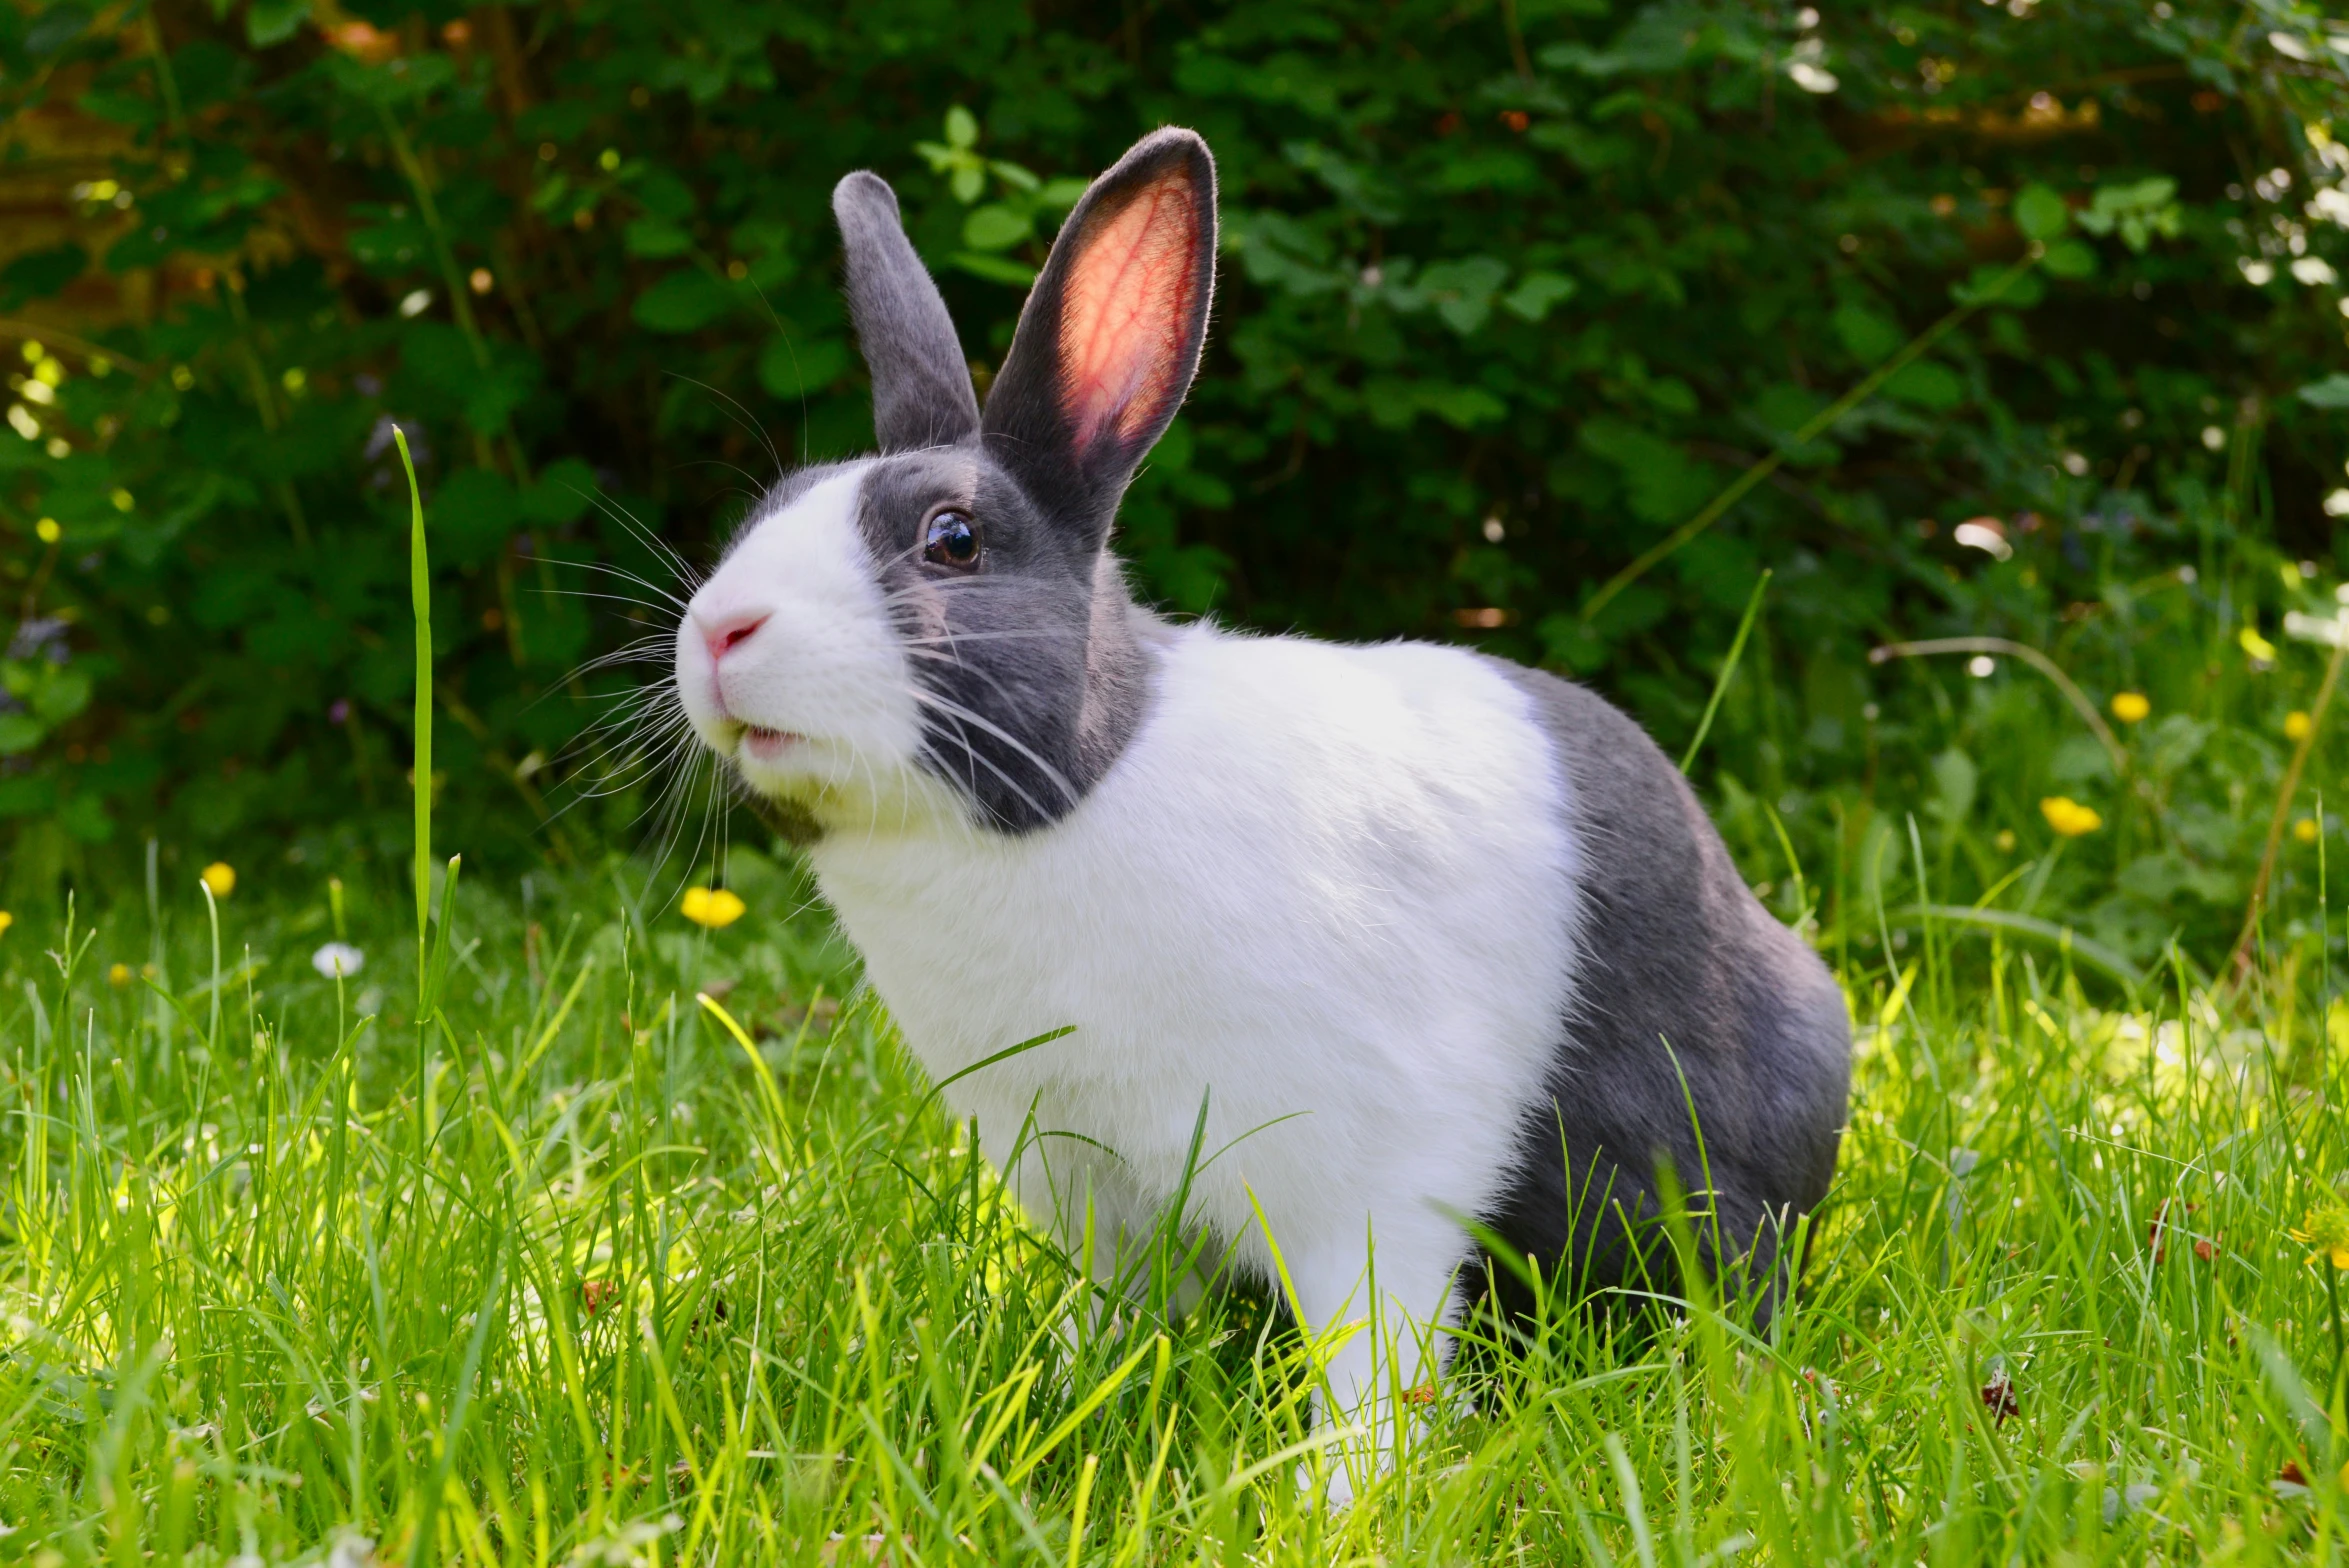 a black and white bunny rabbit in the grass